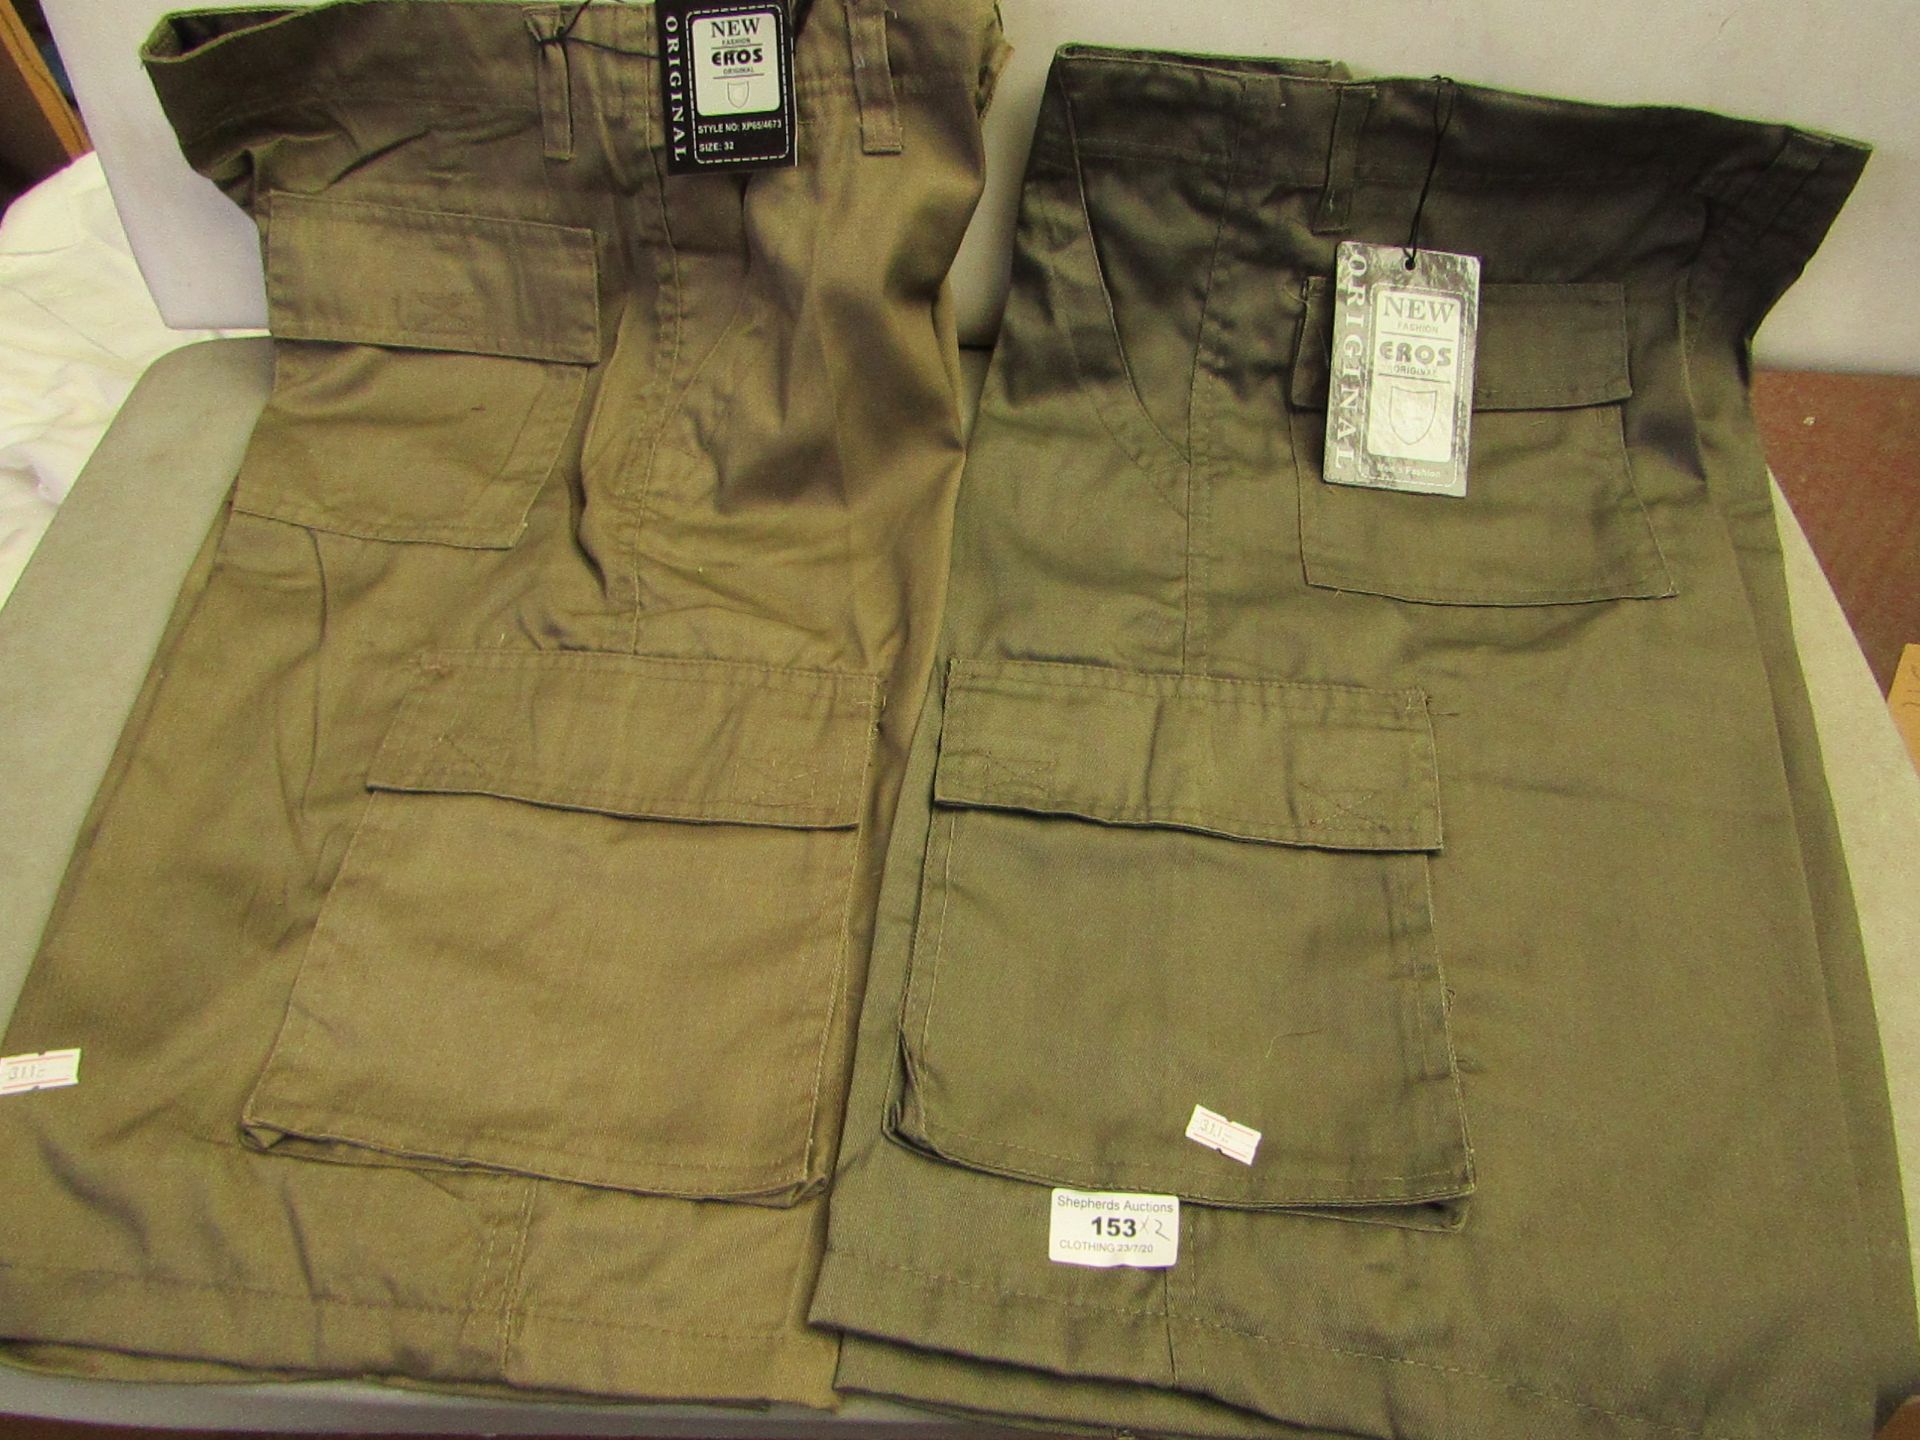 2 Pairs of Eros Cargo Shorts. Size 32 & 36. New with tags